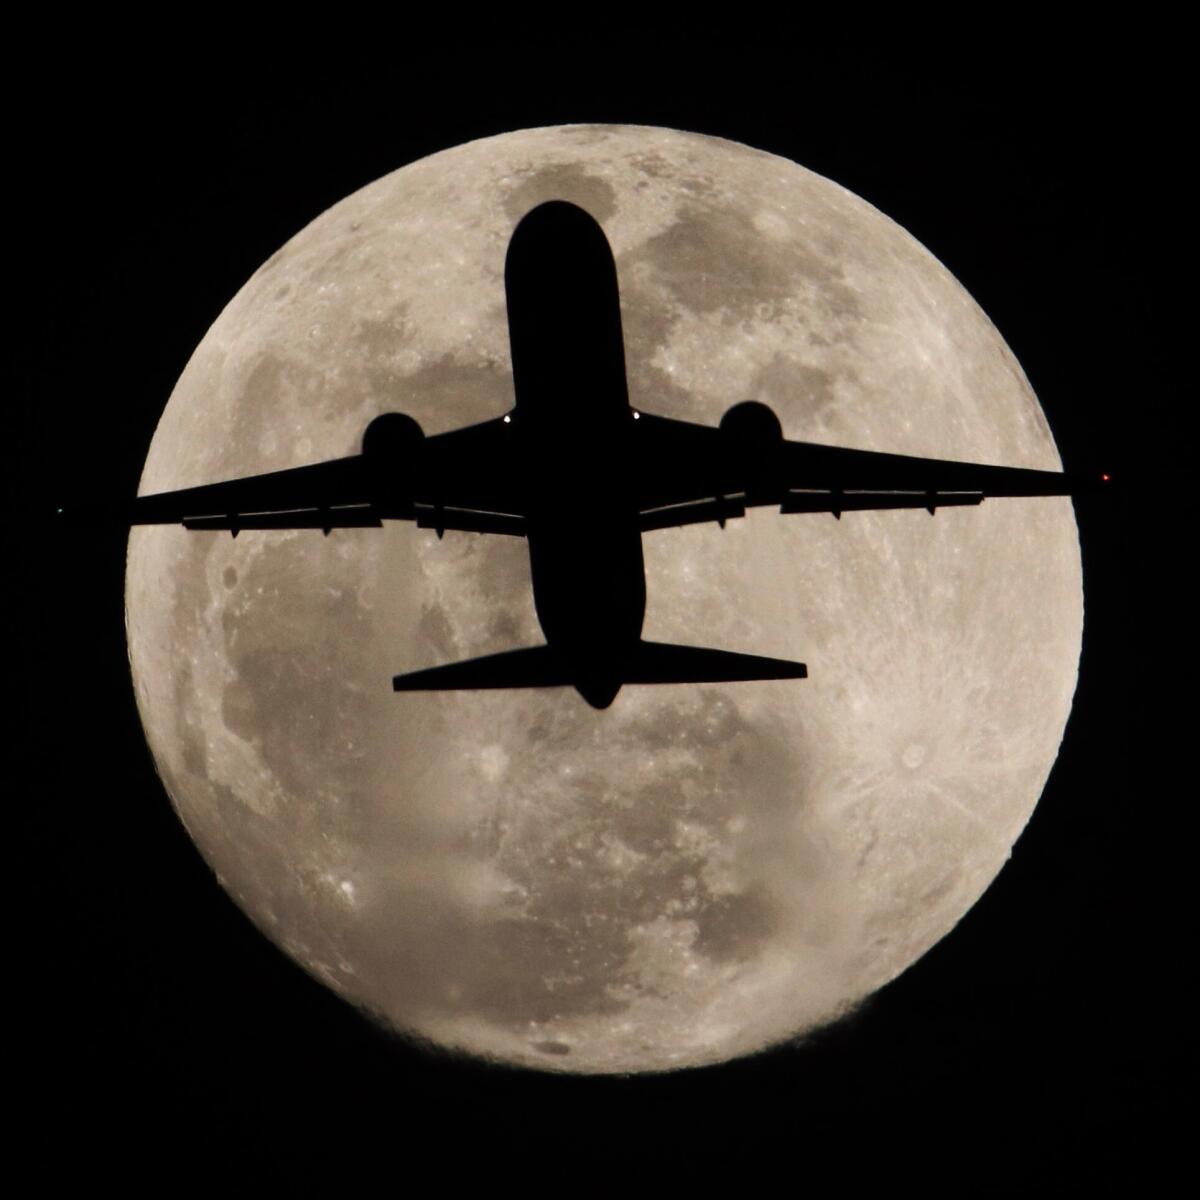 An airplane headed to Los Angeles International Airport crosses in front of the full moon over Whittier, California, Tuesday evening.